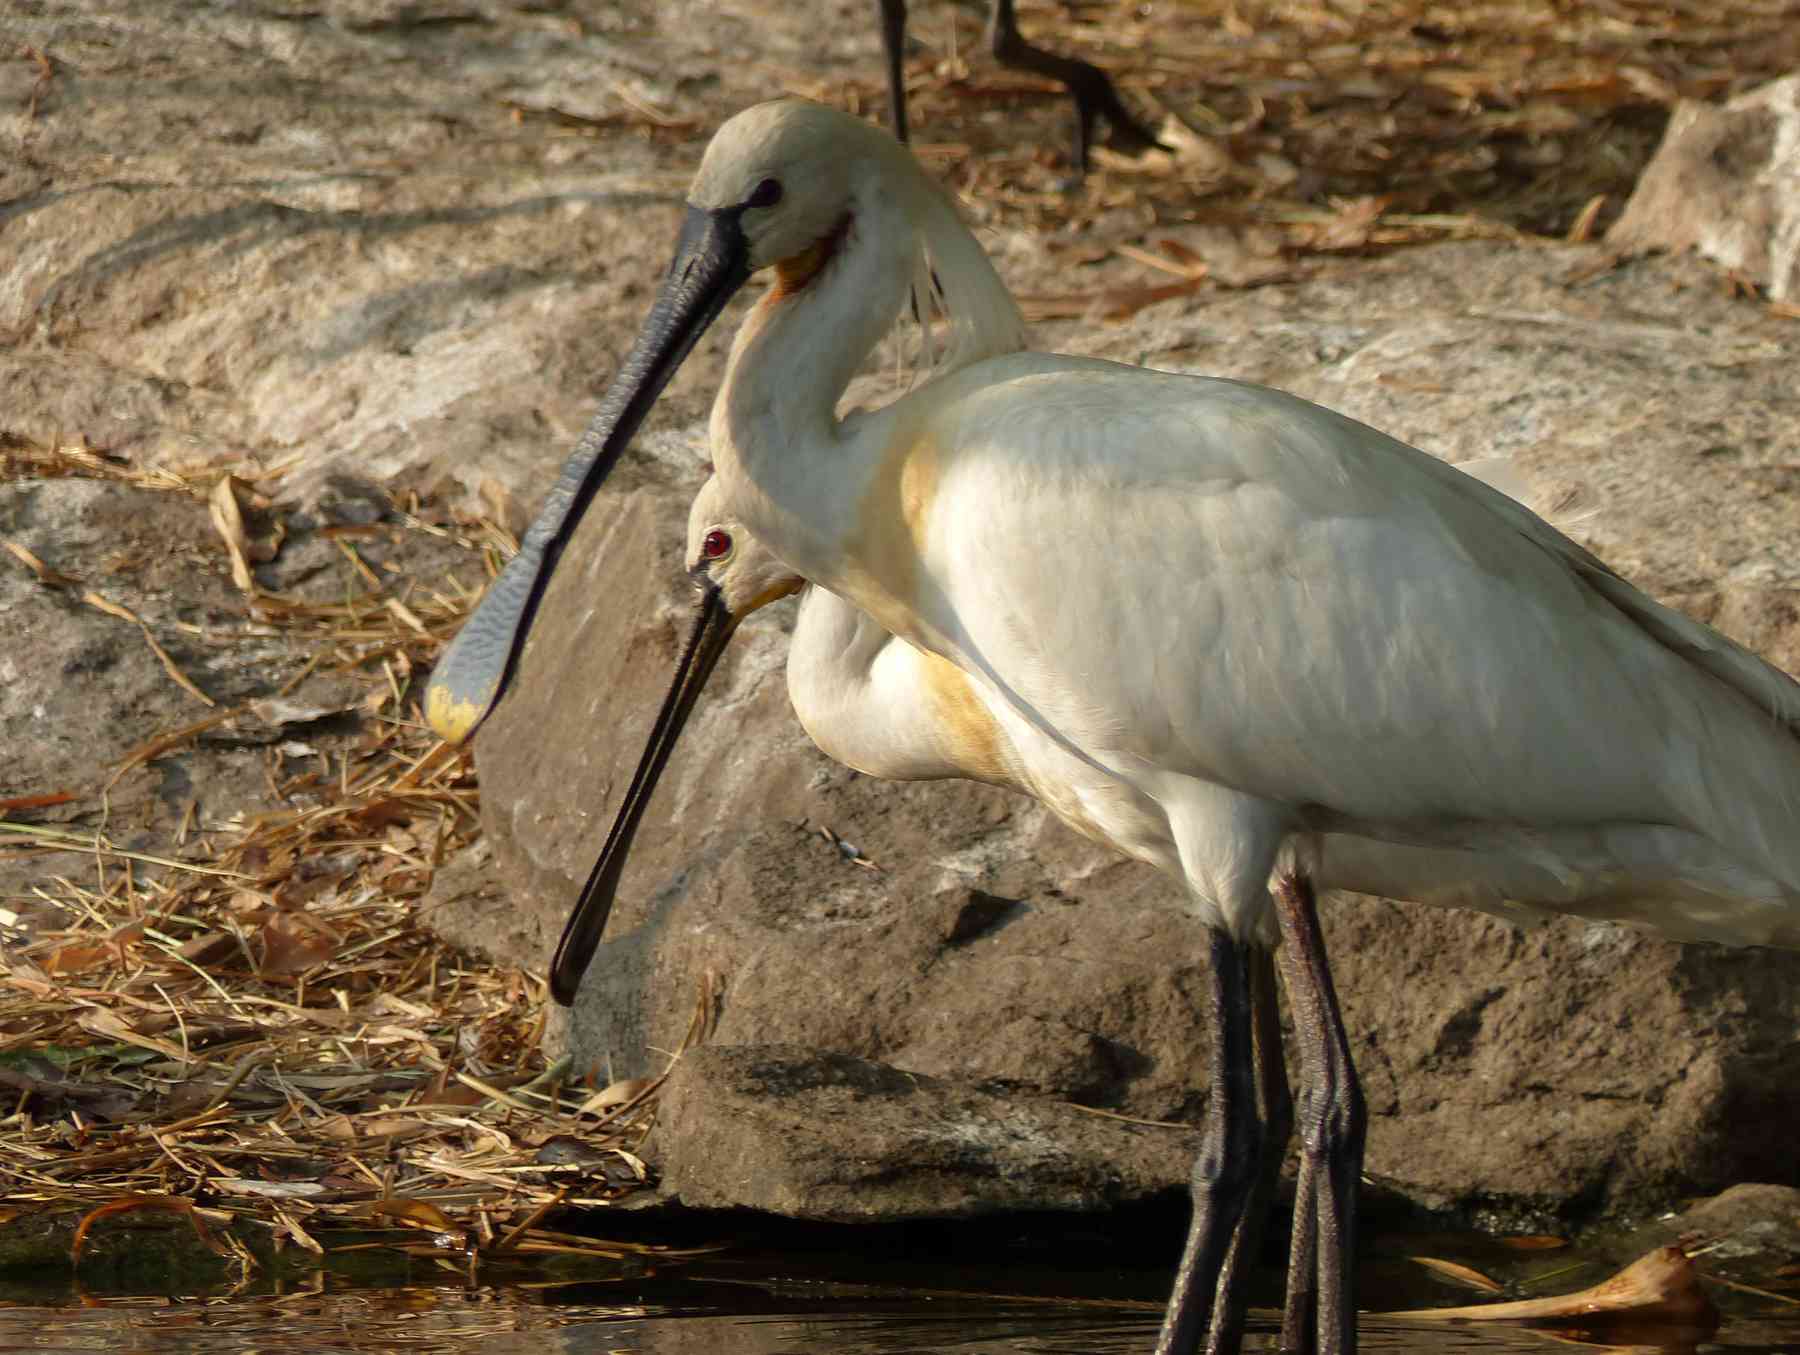 Adult Eurasian Spoonbills are rather regal in appearance